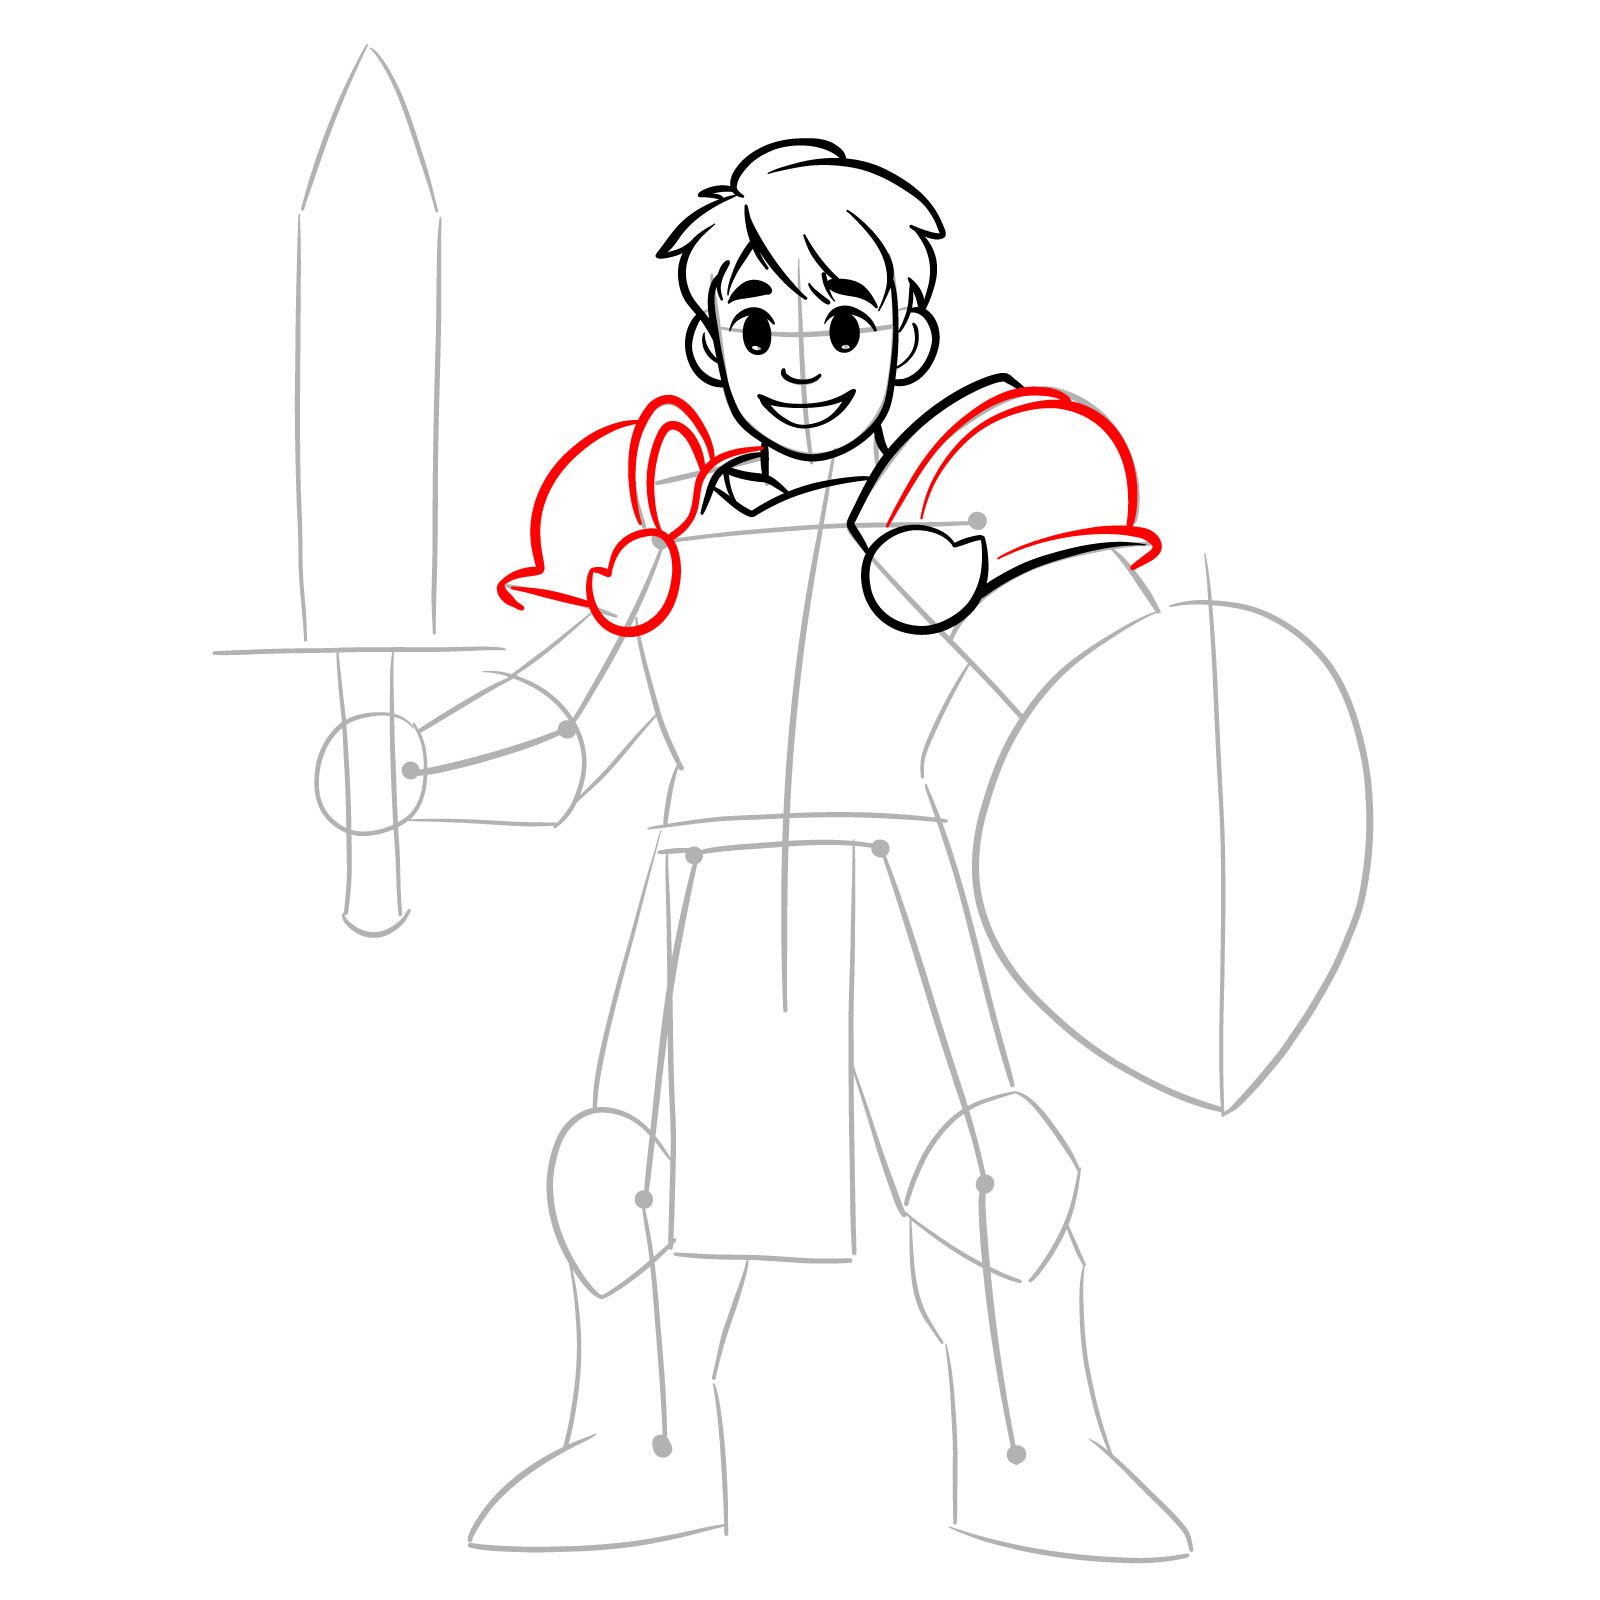 paladin drawing step 10: completing first shoulder armor